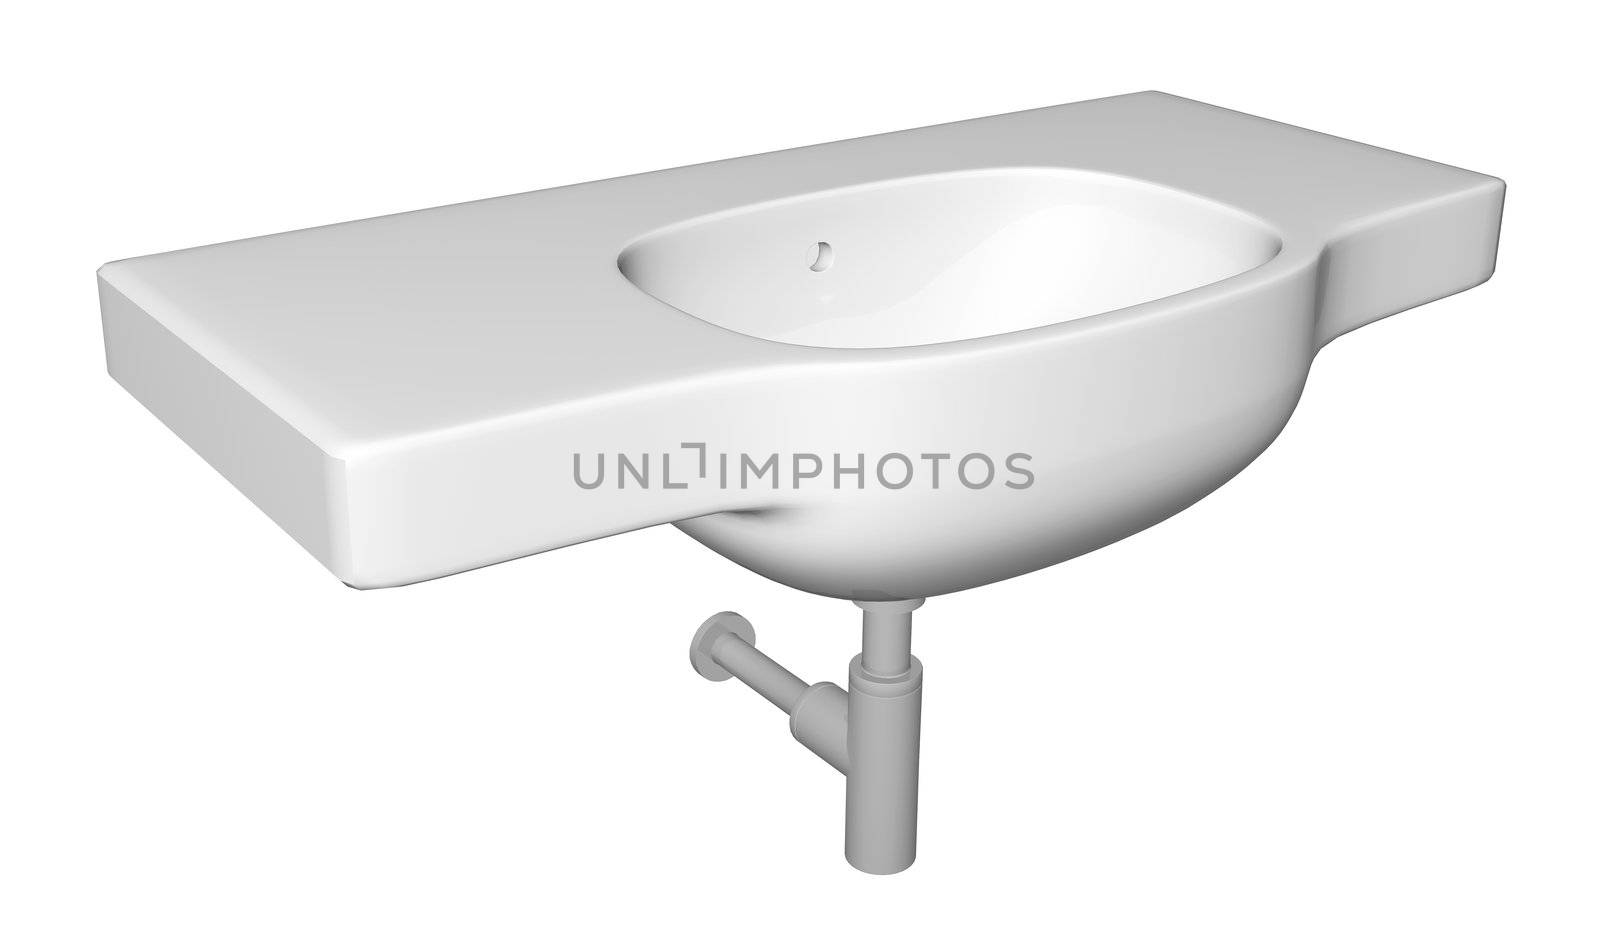 Modern washbasin or sink with faucet and plumbing fixtures by Morphart